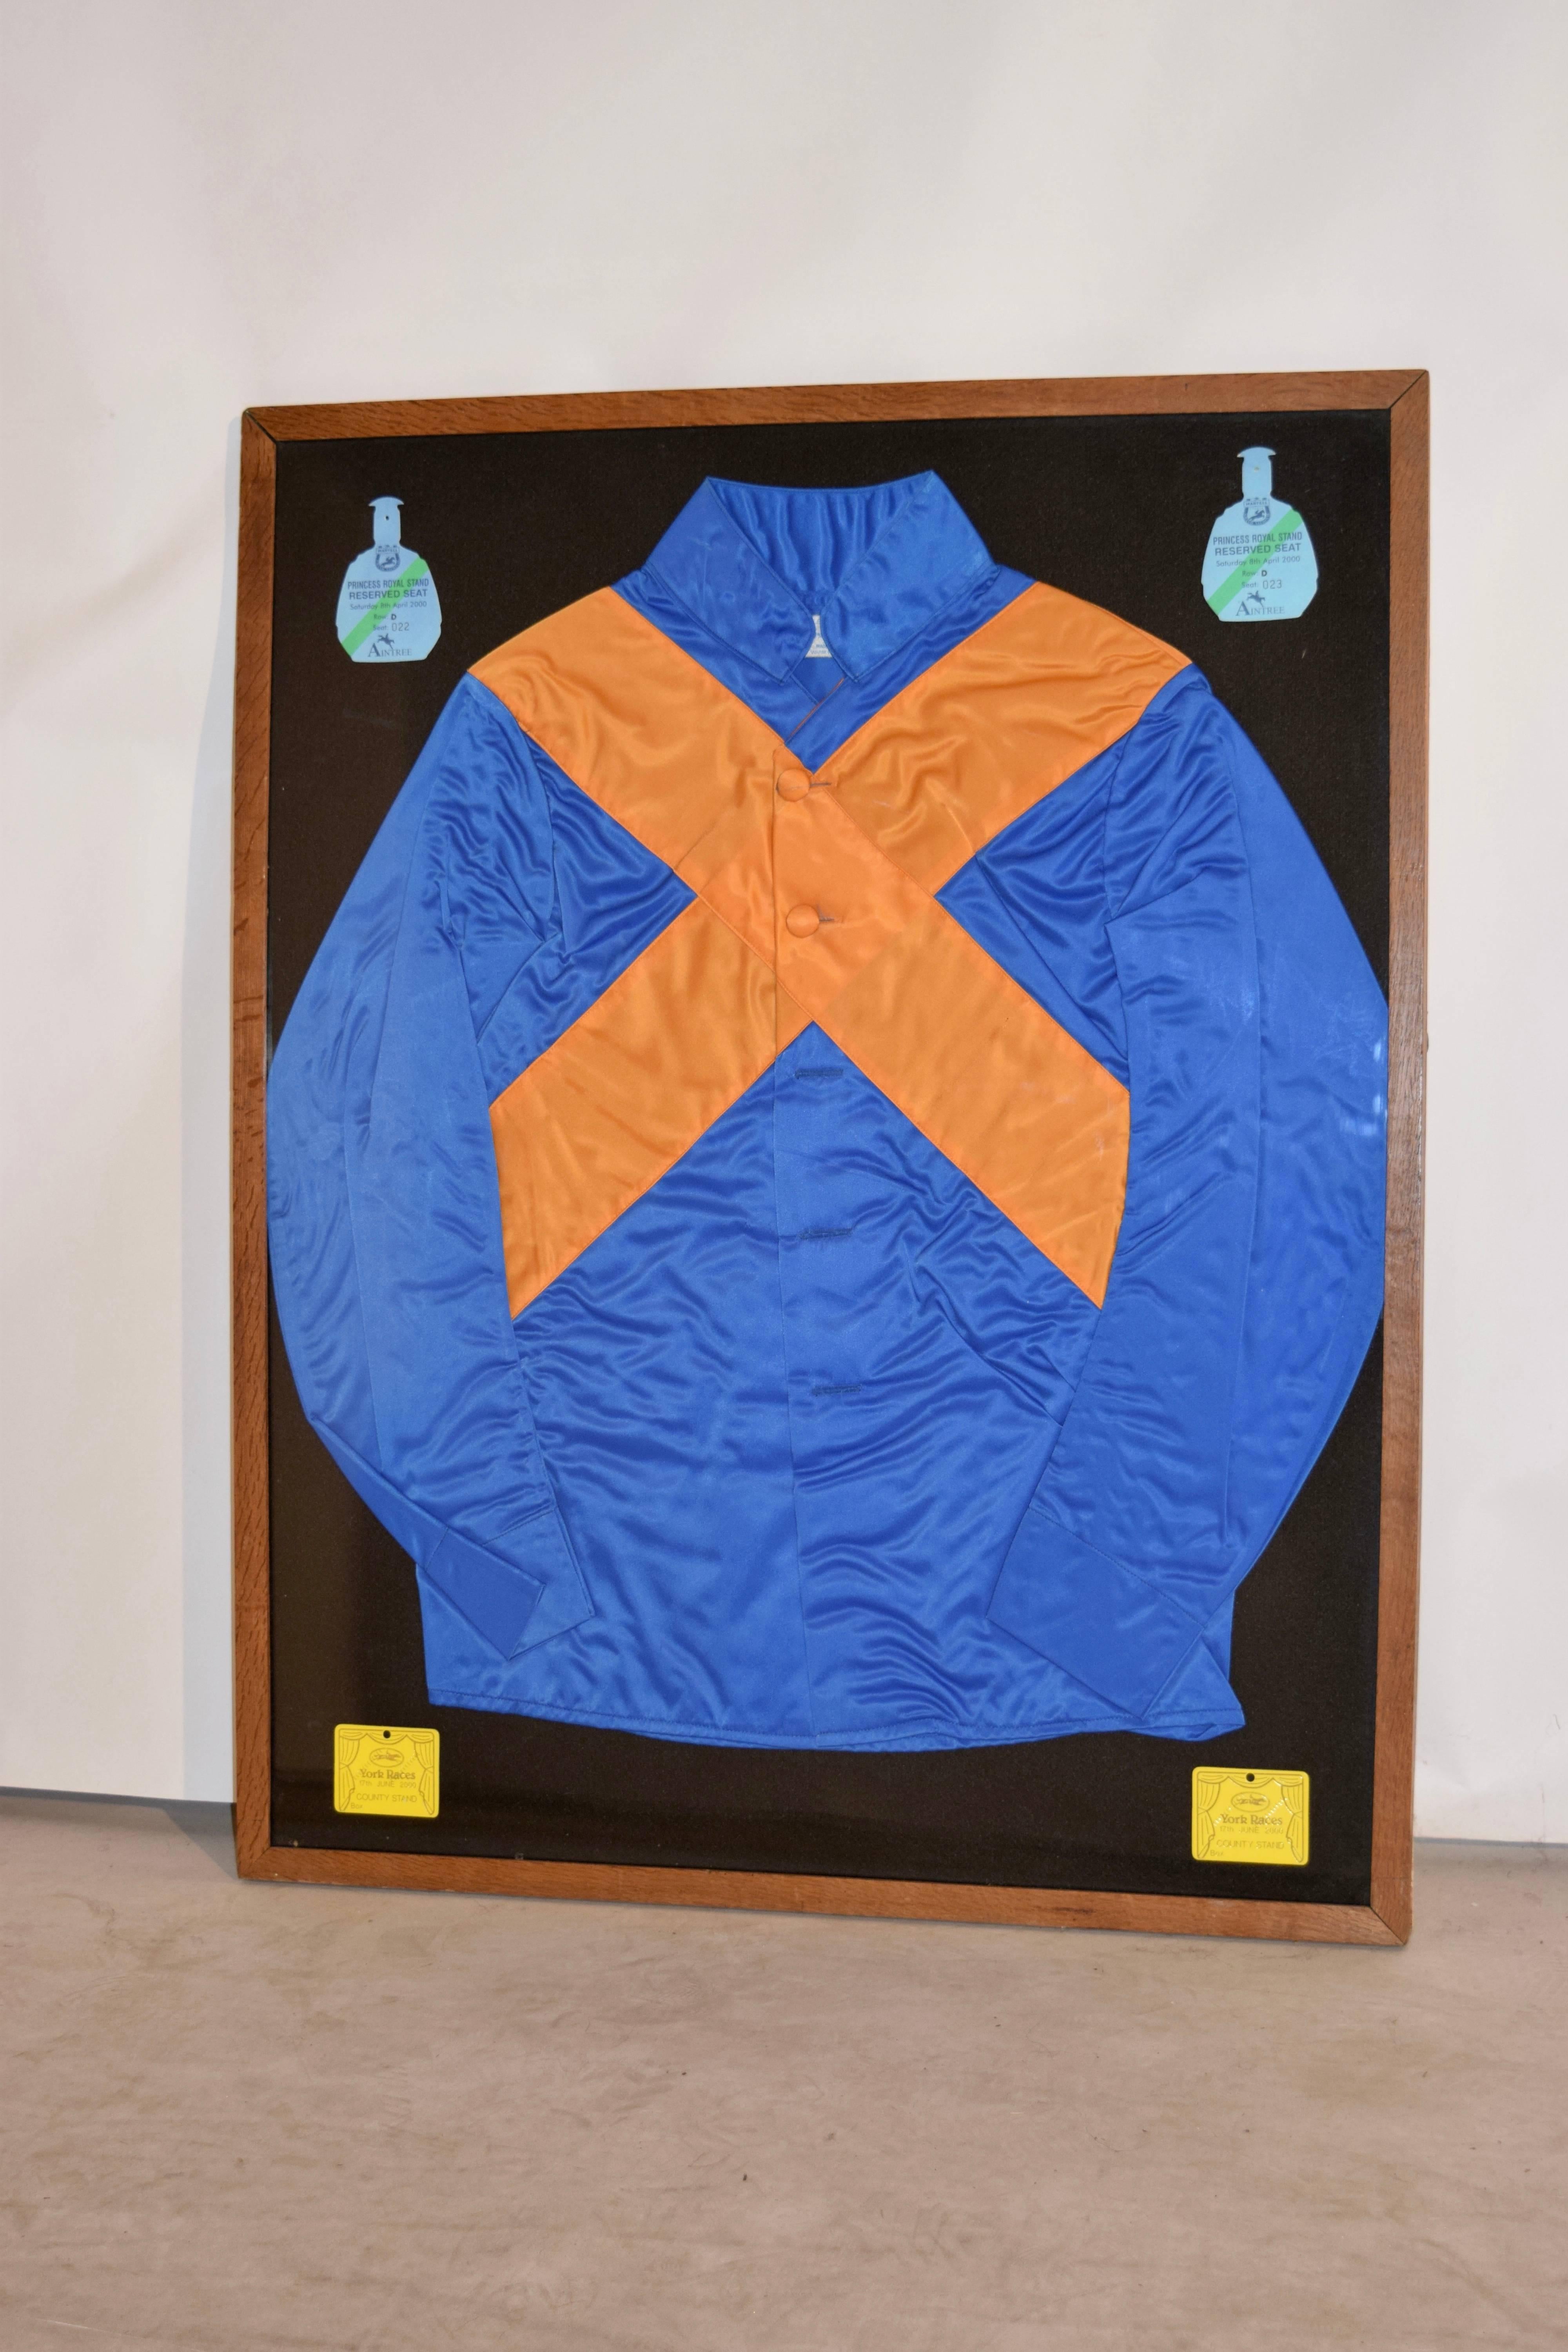 Pair of 20th century jockey silks in frames with race badges in the corners of the frames. Neat decorative accessory.